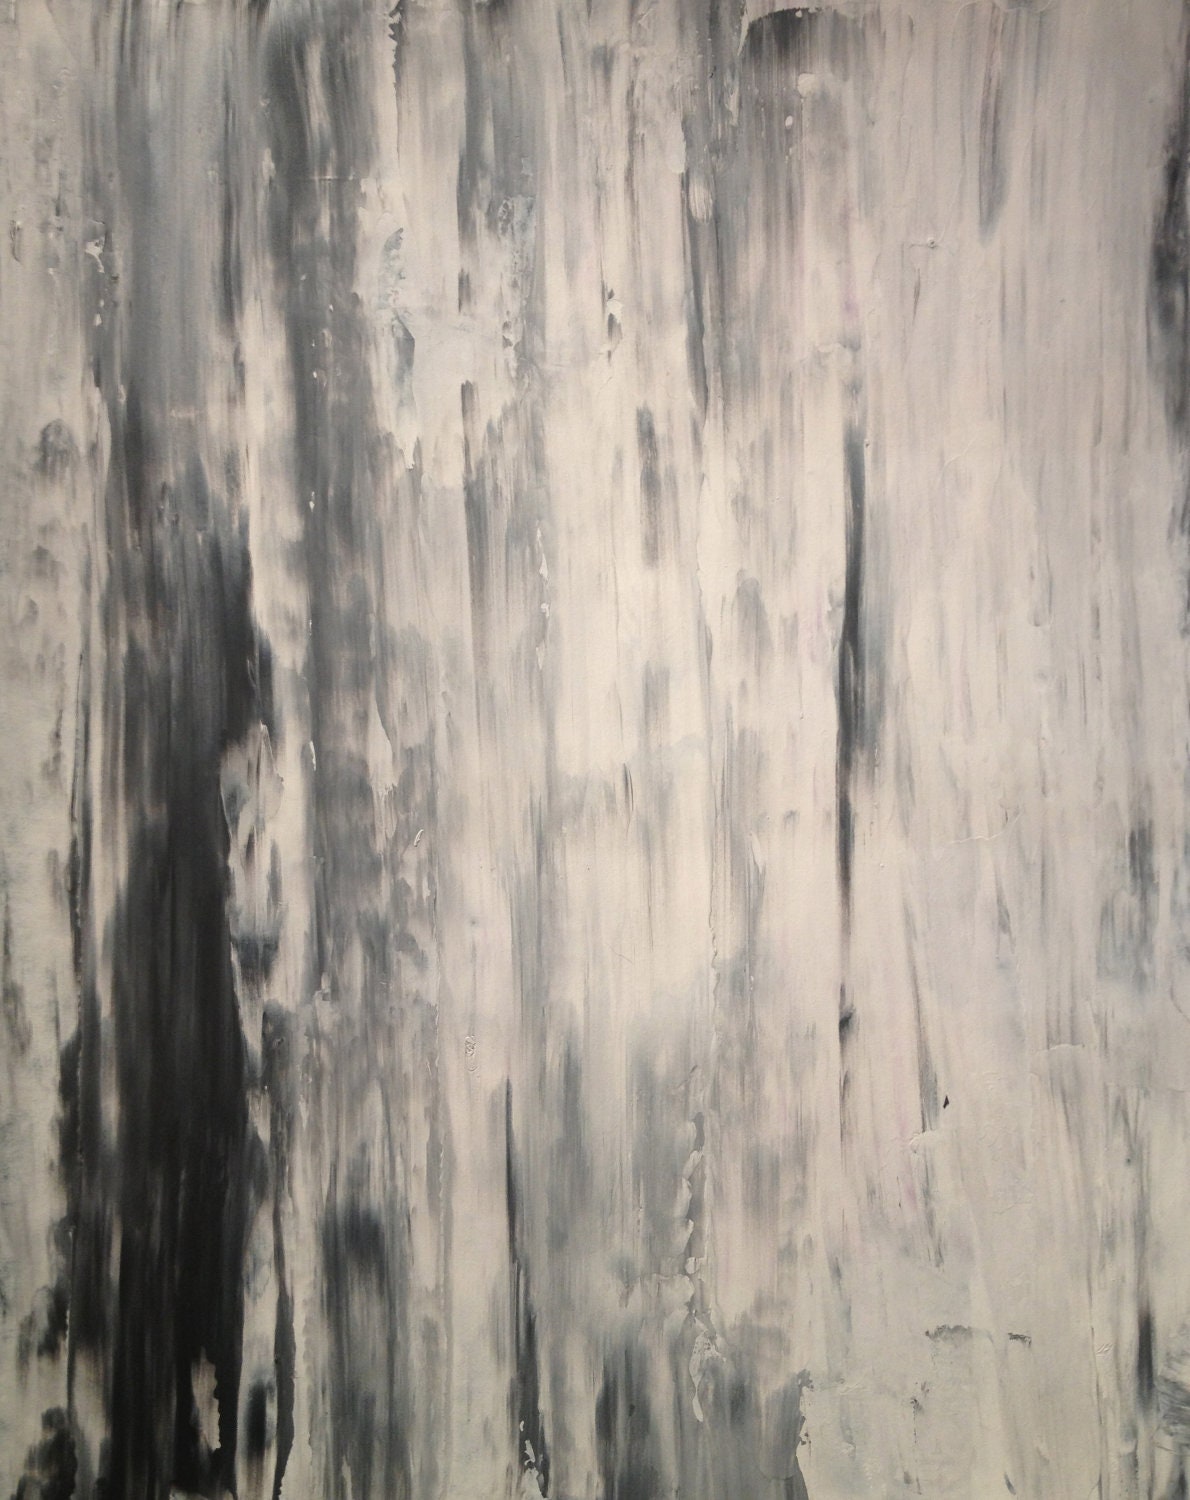 Acrylic Abstract Art Painting Grey White and Black Modern